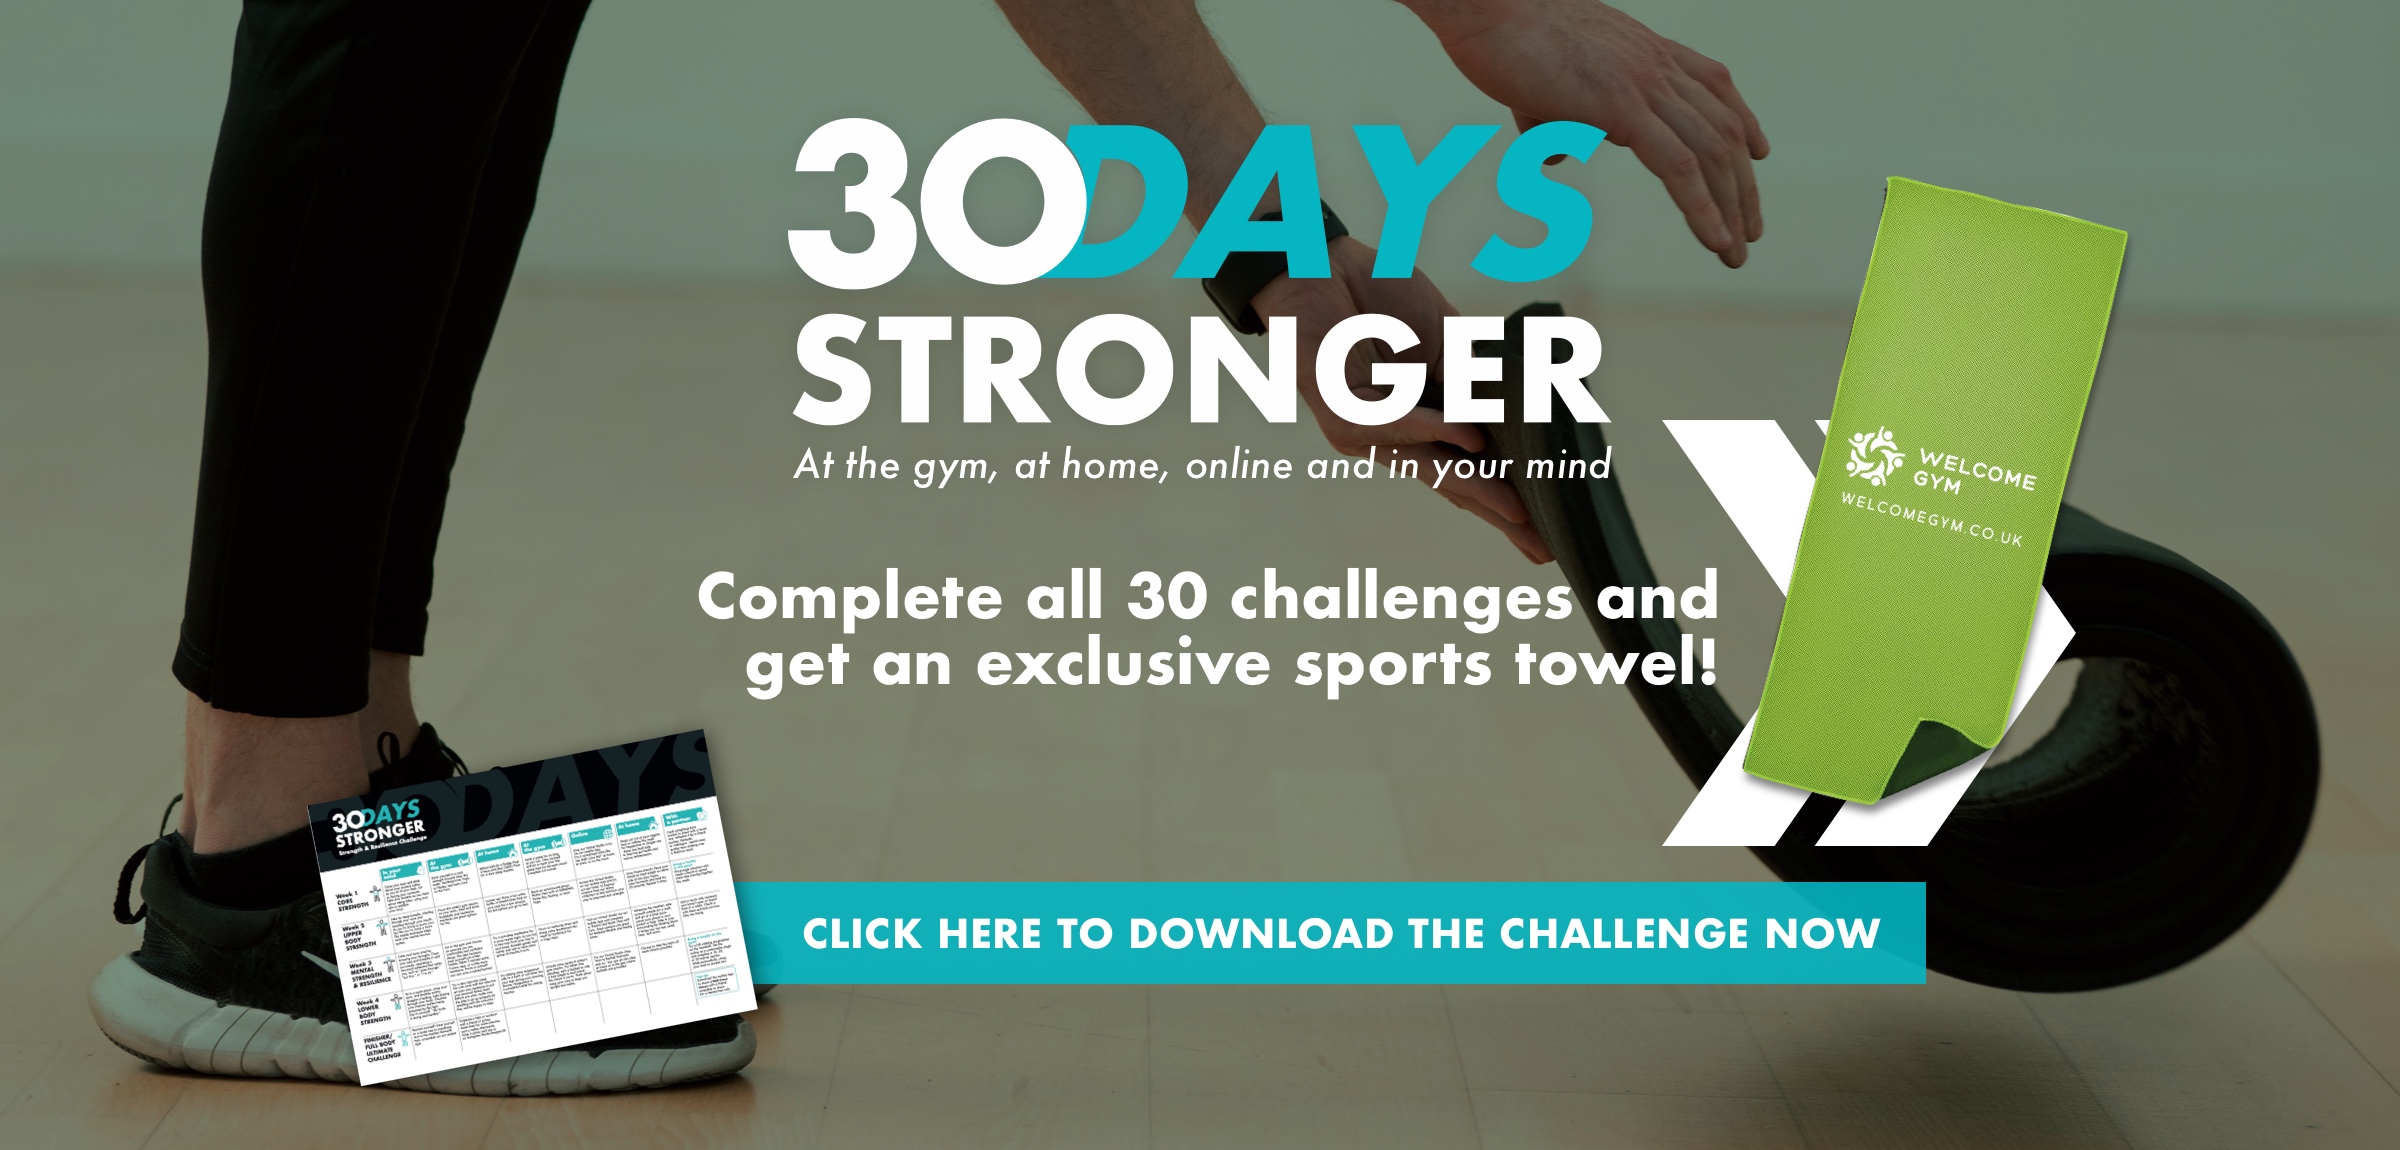 30 Days Stronger - Complete 30 challenges and win sports towel